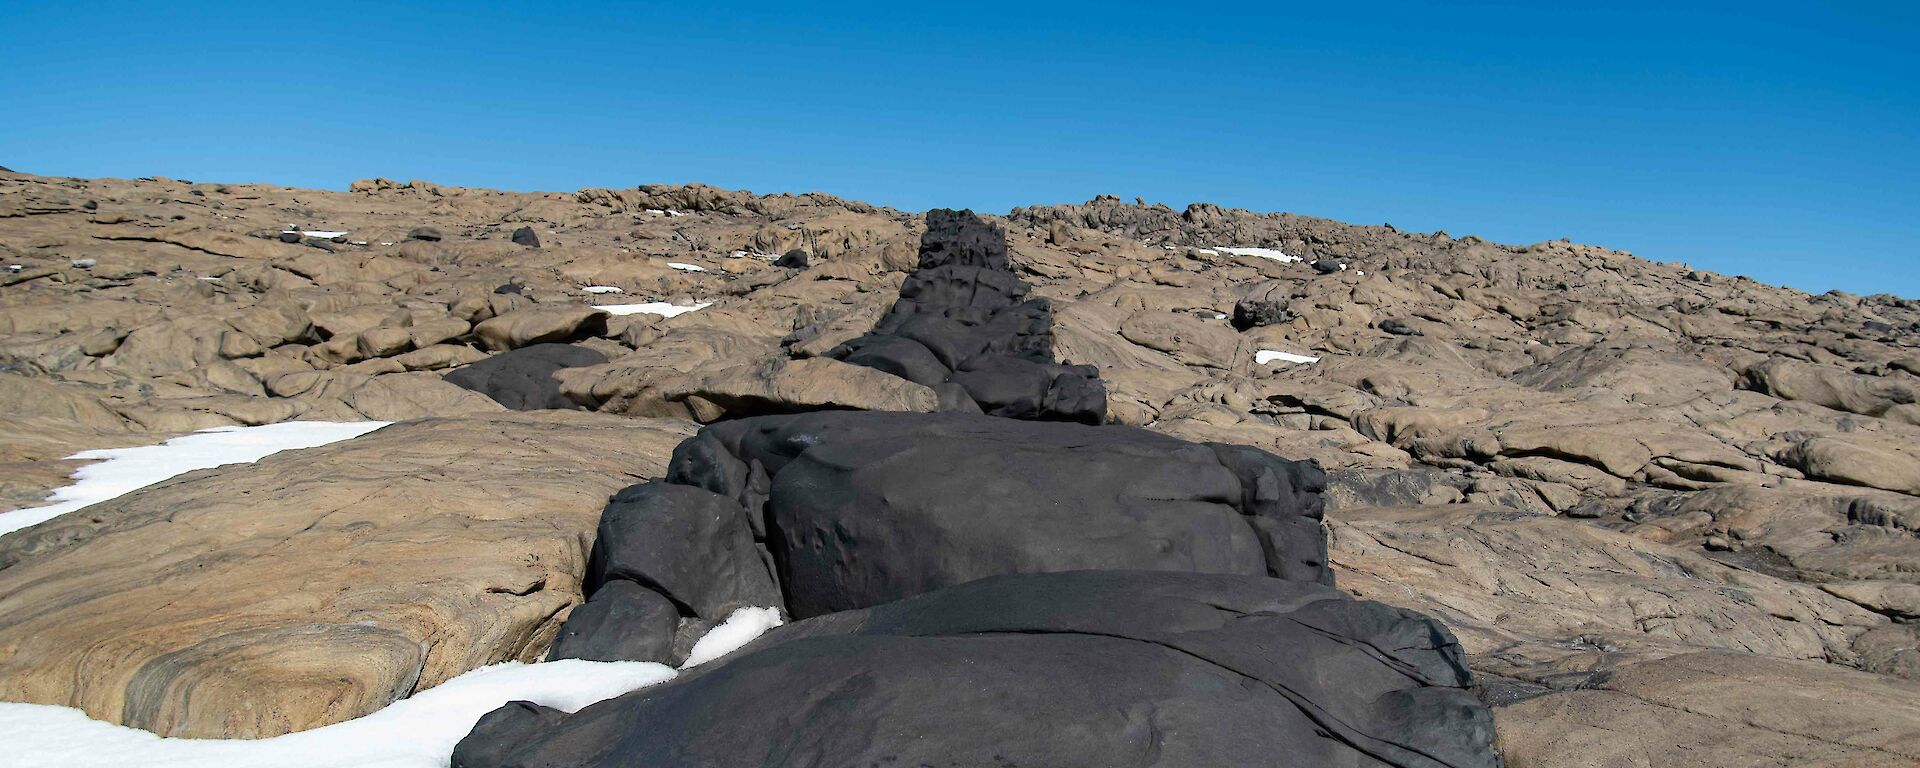 A line of black rock cuts through the surrounding beige rock of a hill with the blue sky visible above it.